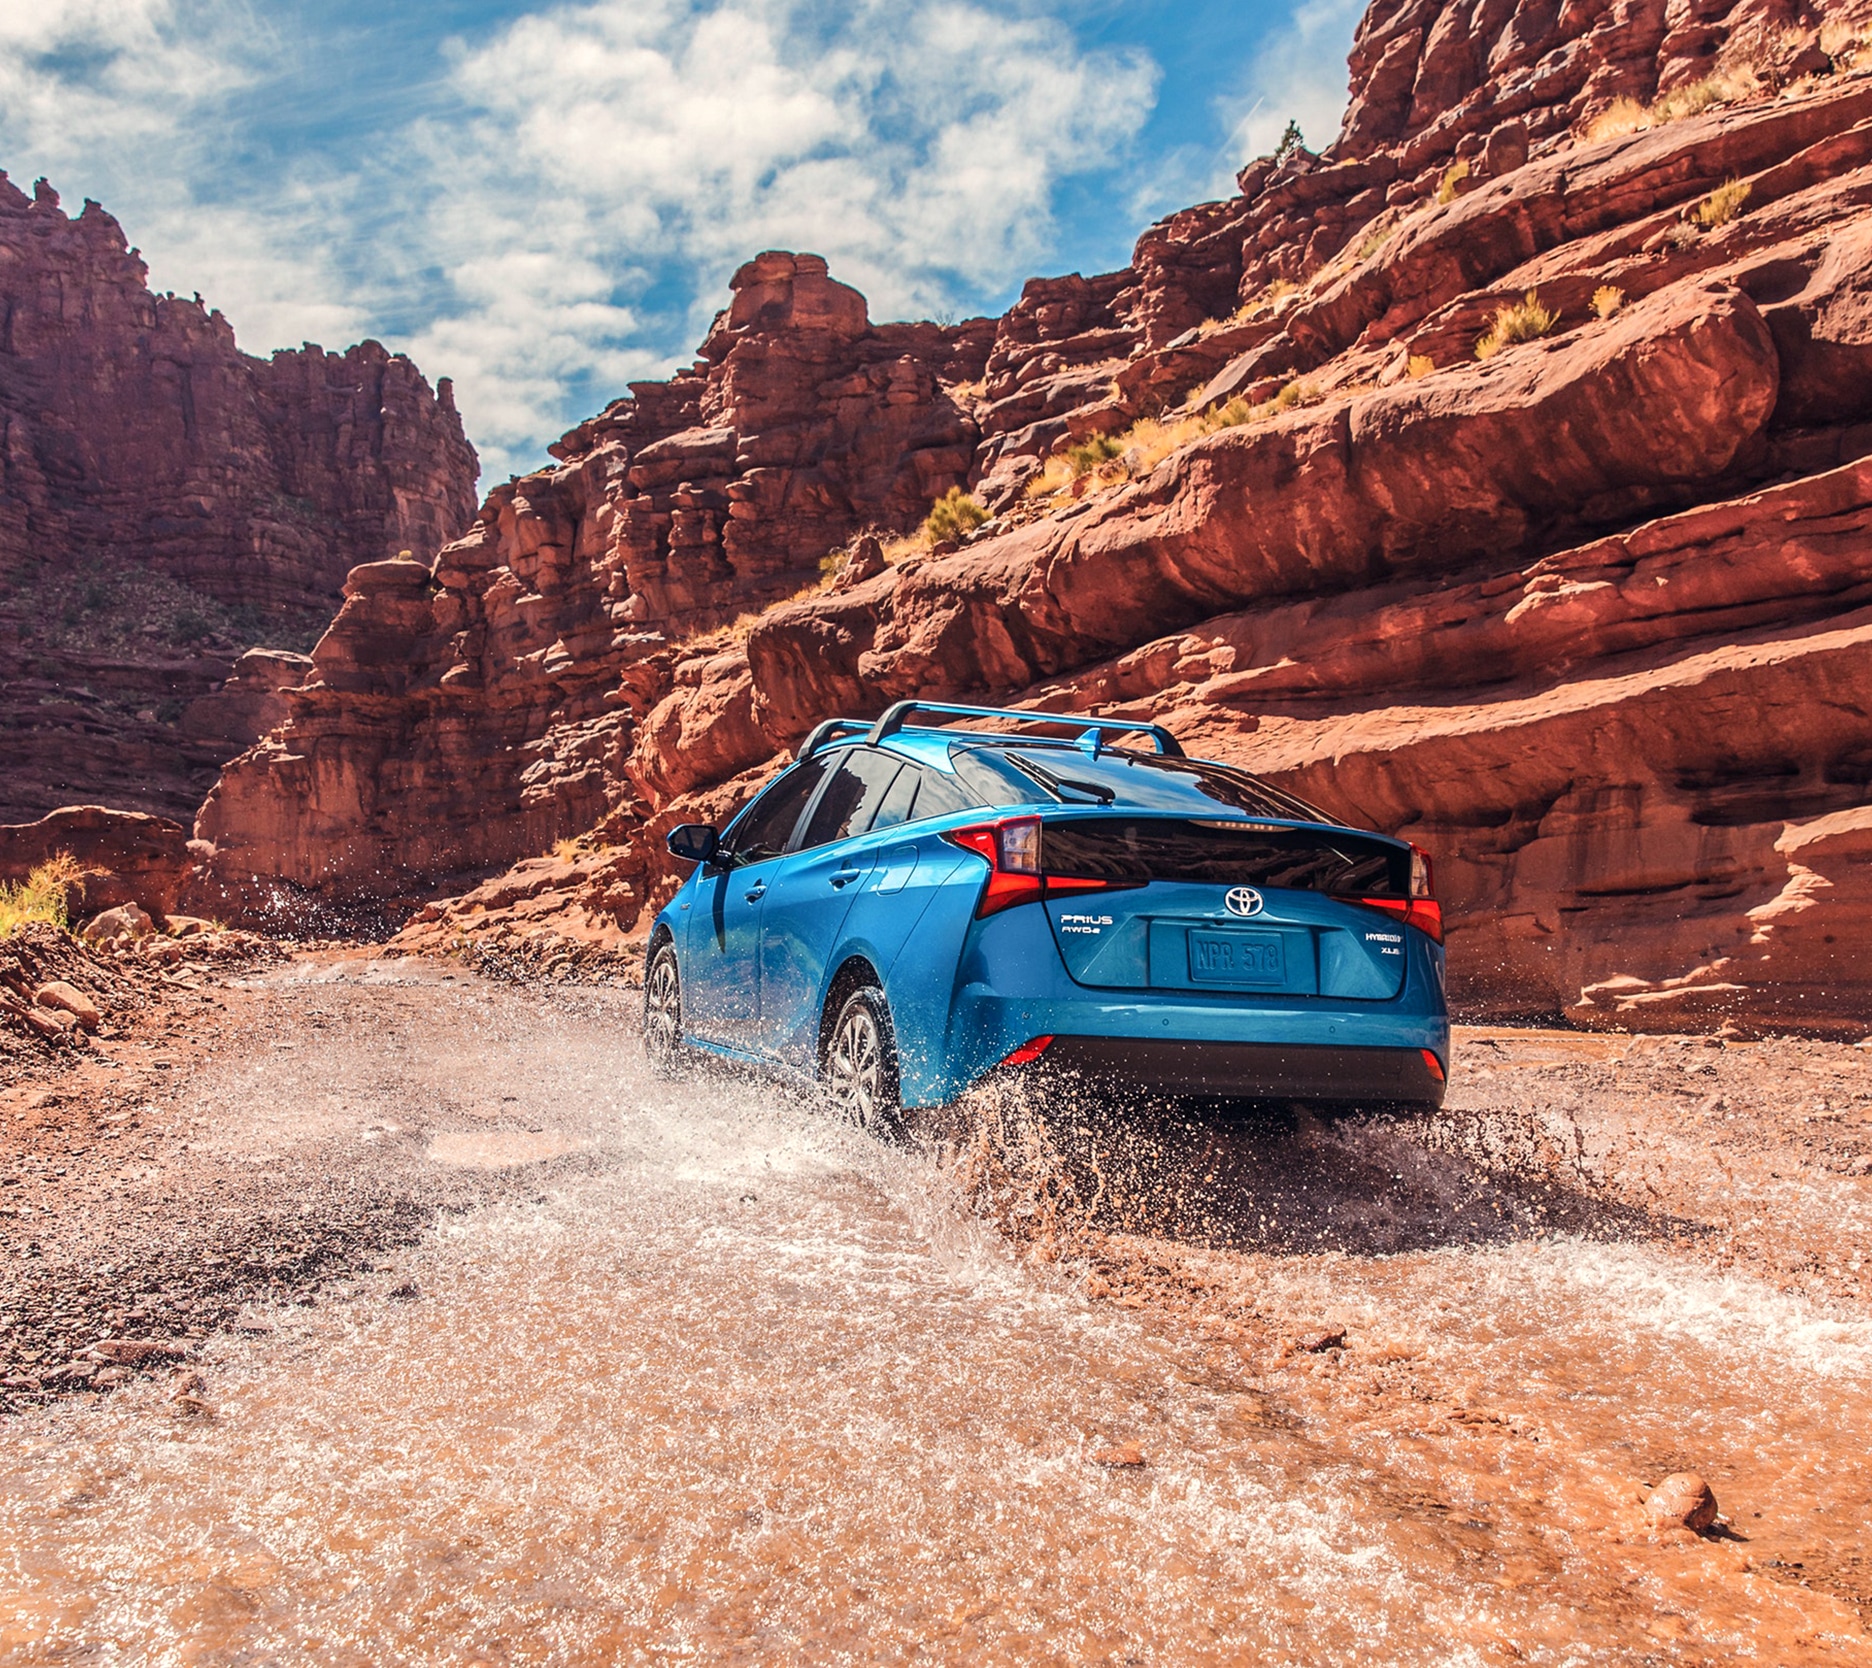 Rearview of a Toyota Prius driving through a stream next to rock formations.